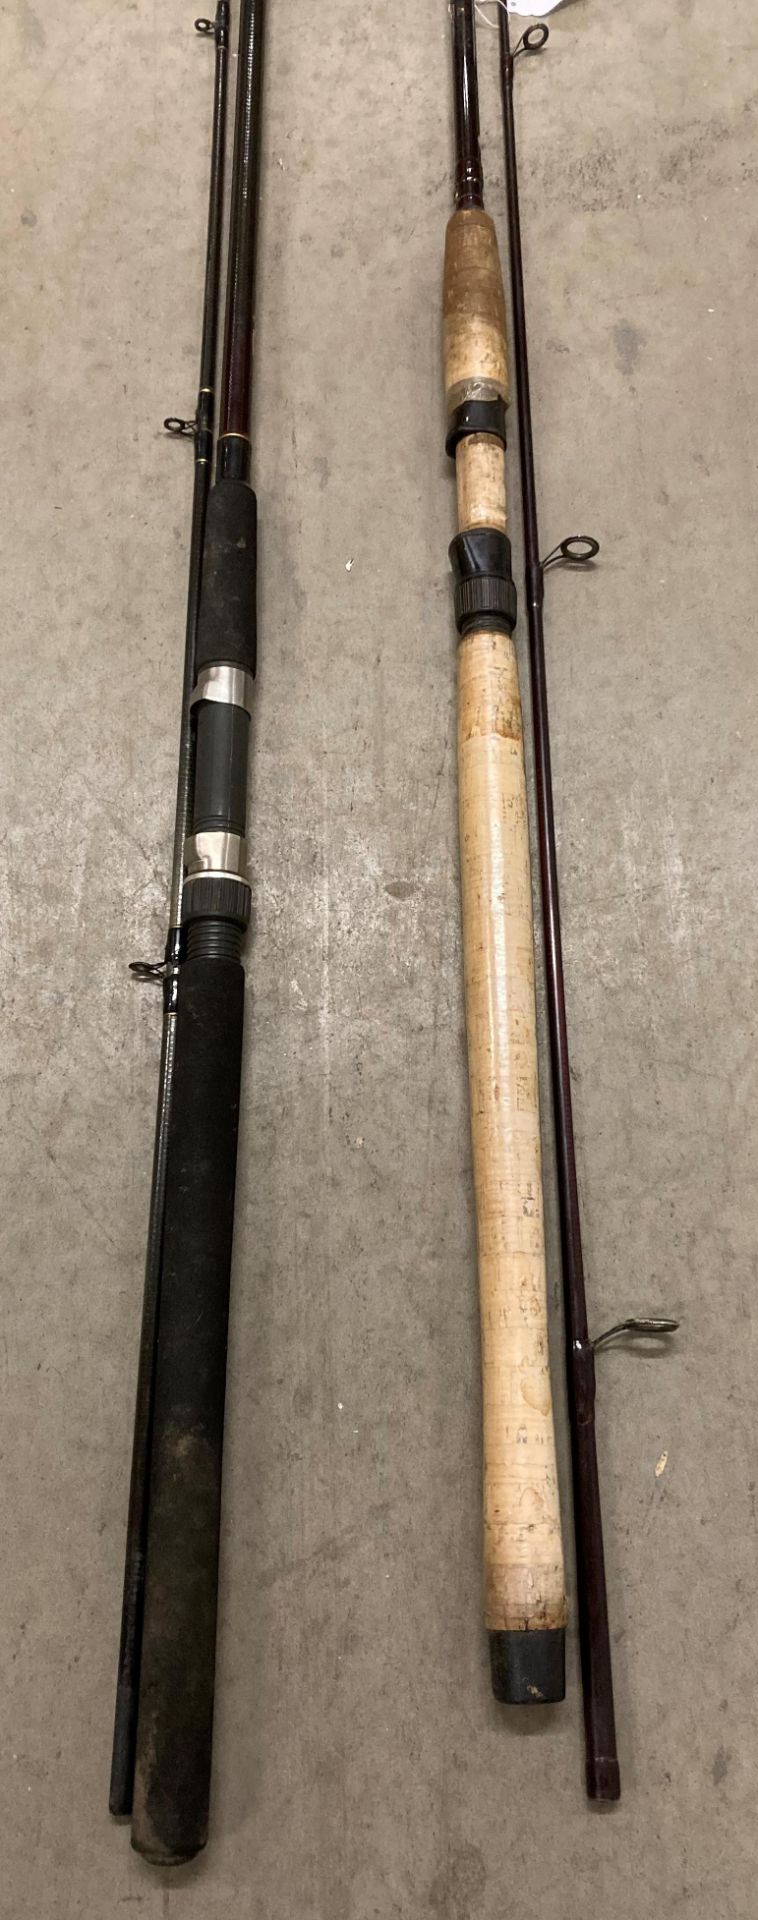 Two fishing rods by DAM - Fighter CF Picker 3m carbon 2-piece and a Shimano Stradic Super Graphite - Bild 2 aus 3